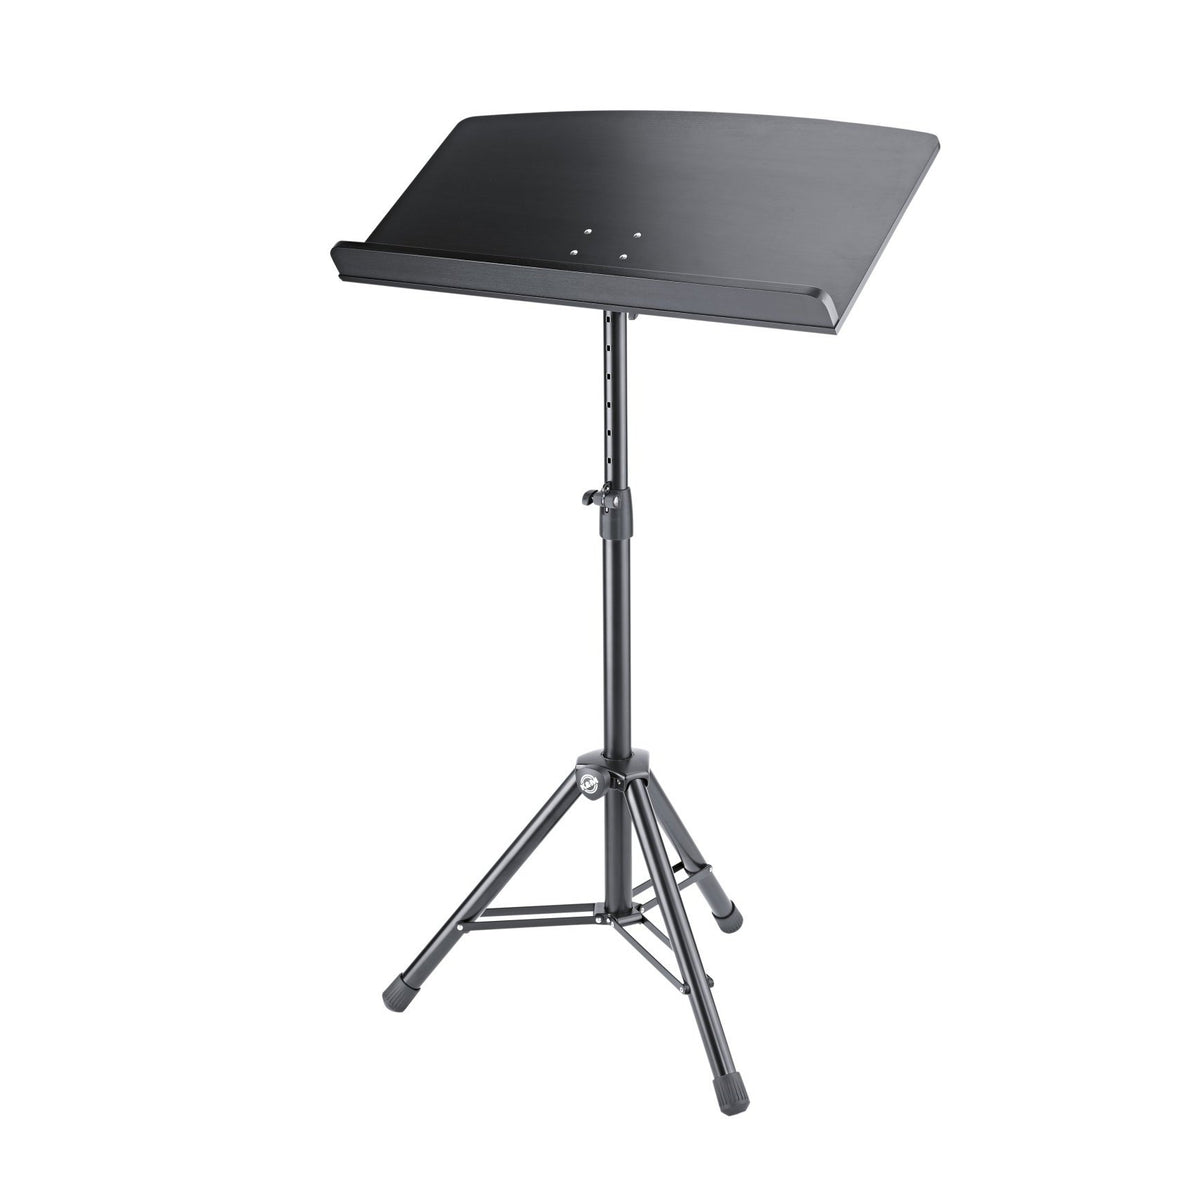 KÃ¶nig &amp; Meyer - 12333 Orchestra Conductor Stand Desks-Music Stand-KÃ¶nig &amp; Meyer-Music Elements